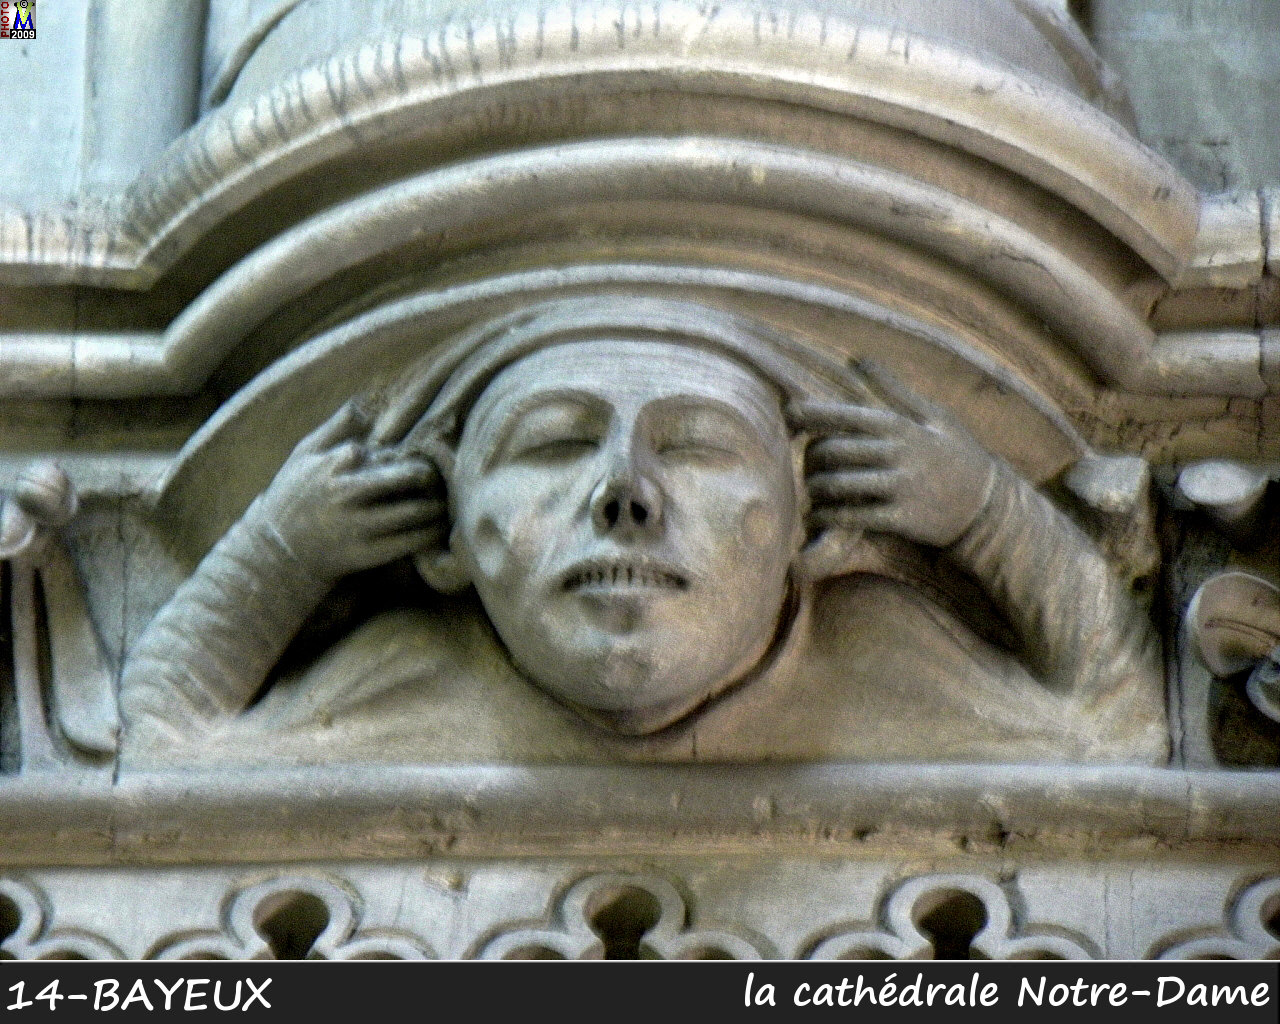 14BAYEUX_cathedrale_216.jpg